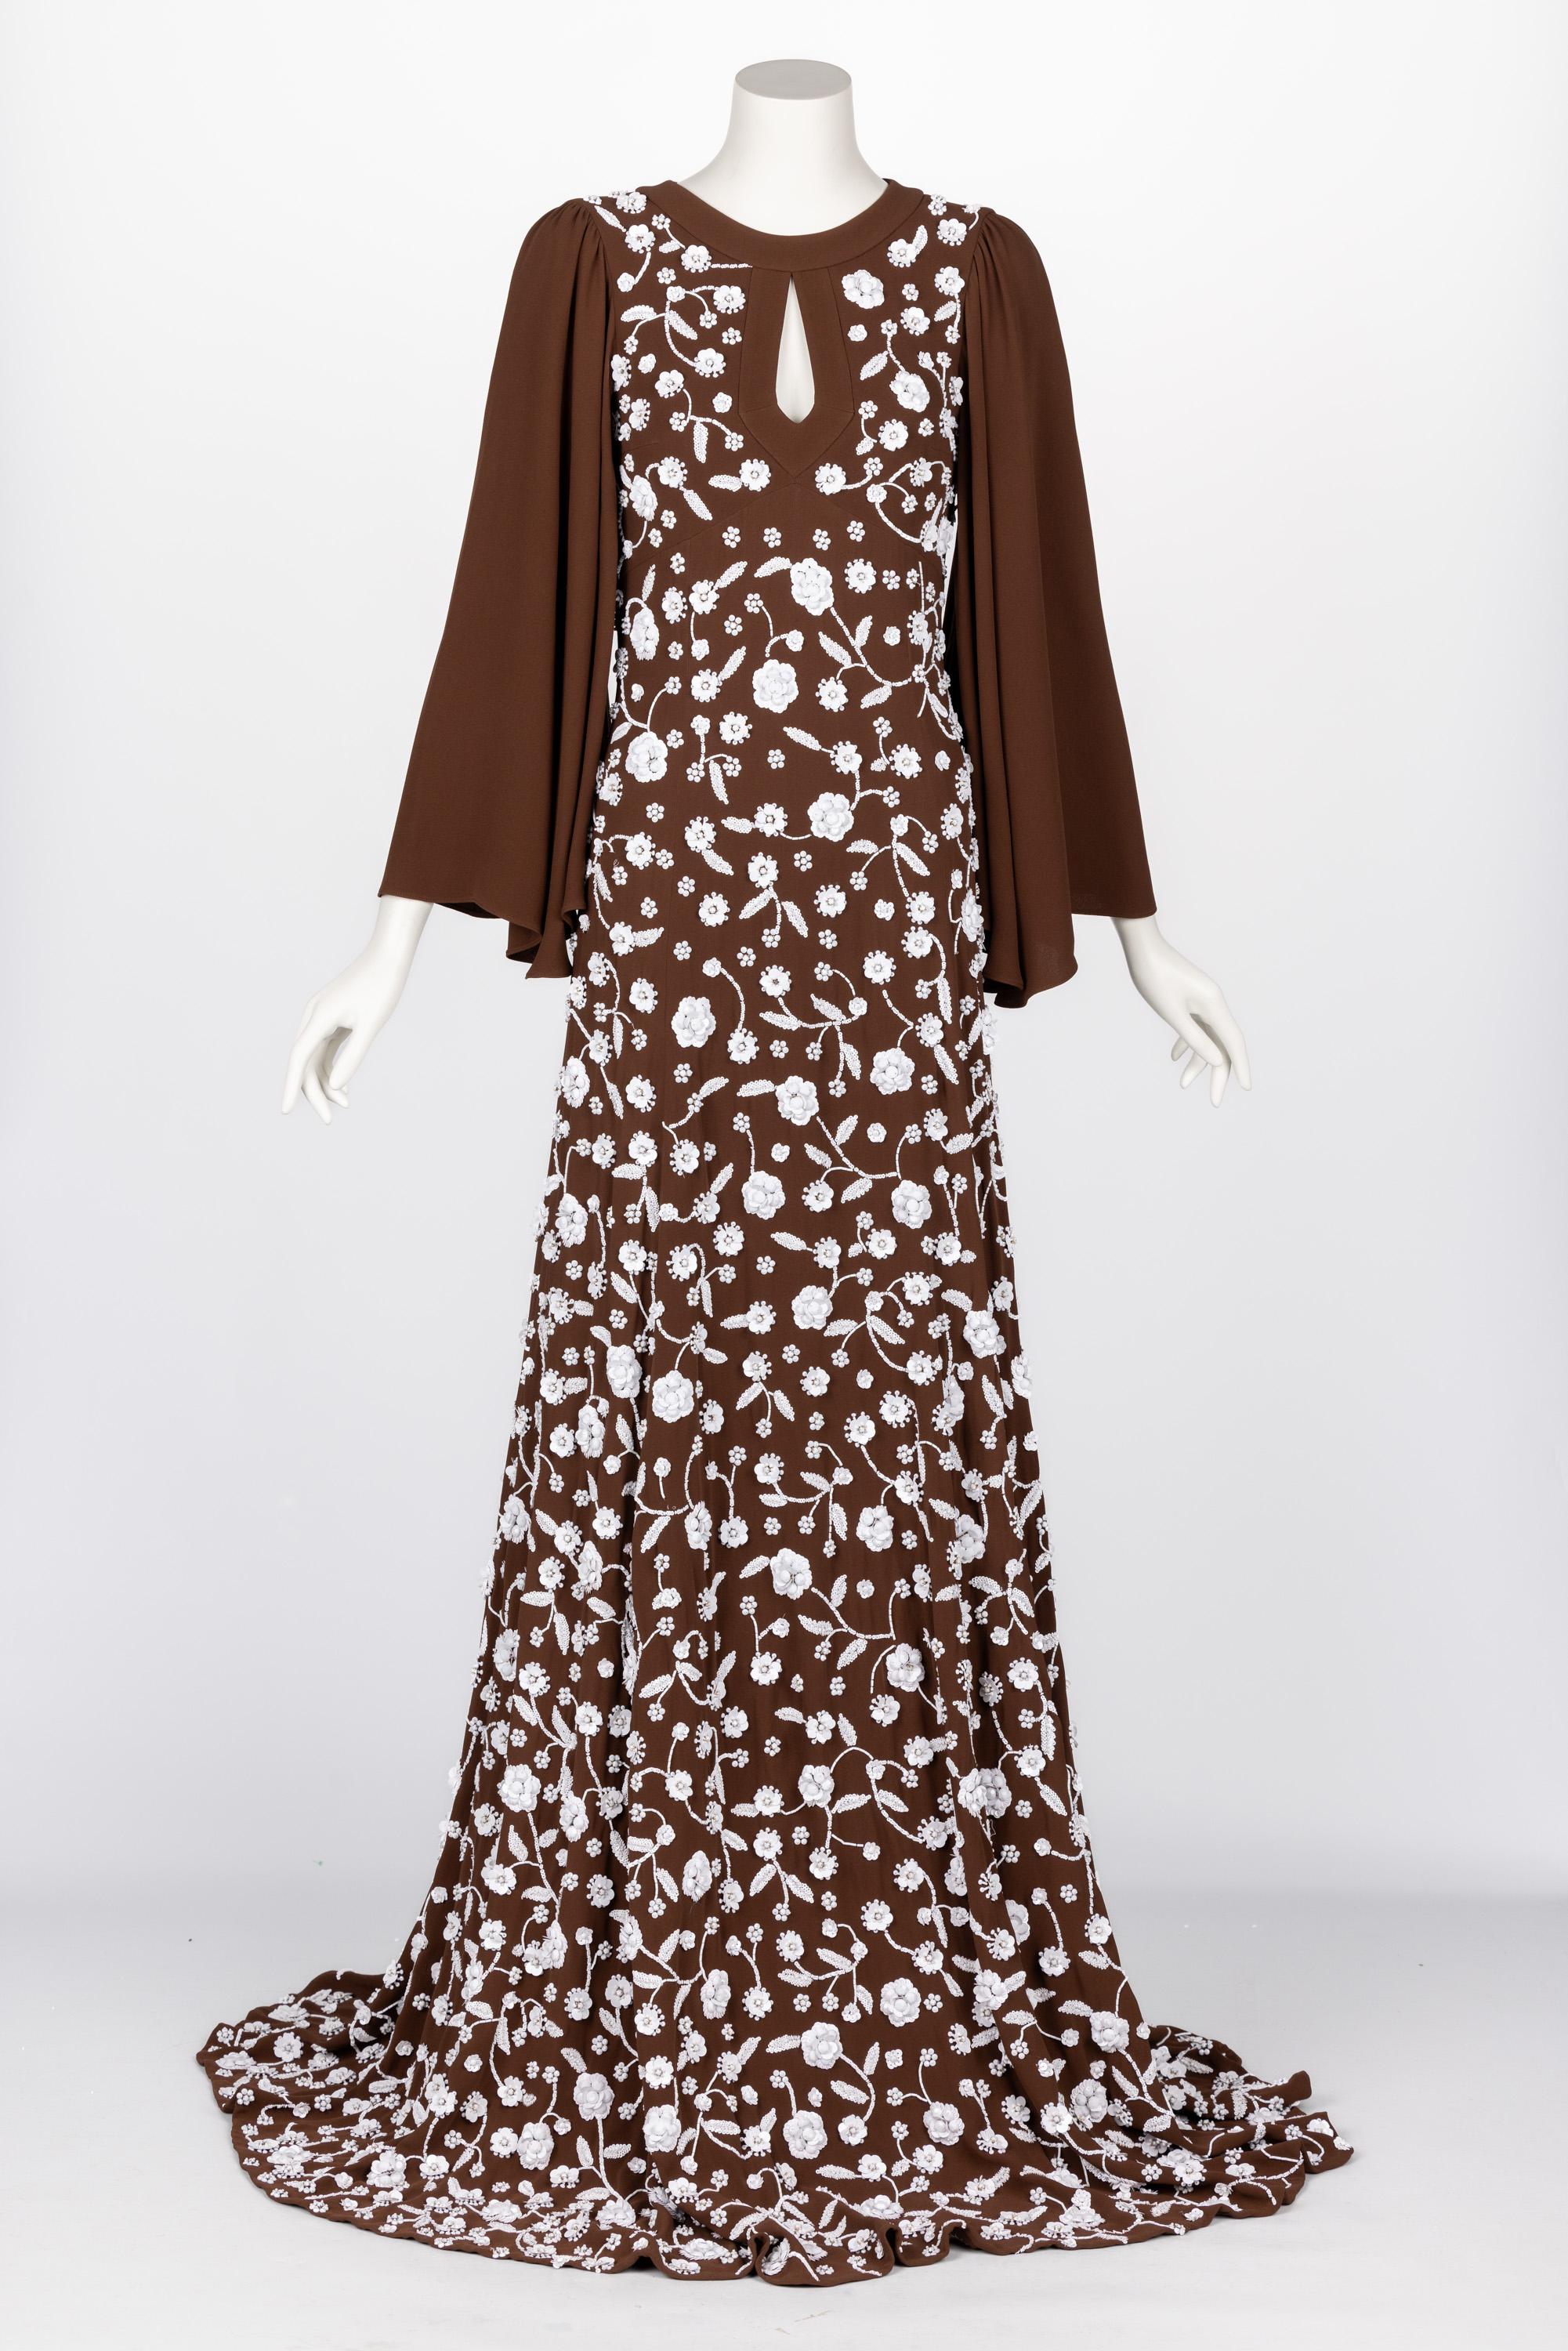 Stunning Michael Kors runway look #55 gown with a cut-out front and large cut-out open back.

This is the gown version of that runway look, just longer and better!!
Done in brown silk, with allover intricate sequin and  beadwork. 
Fully lined in